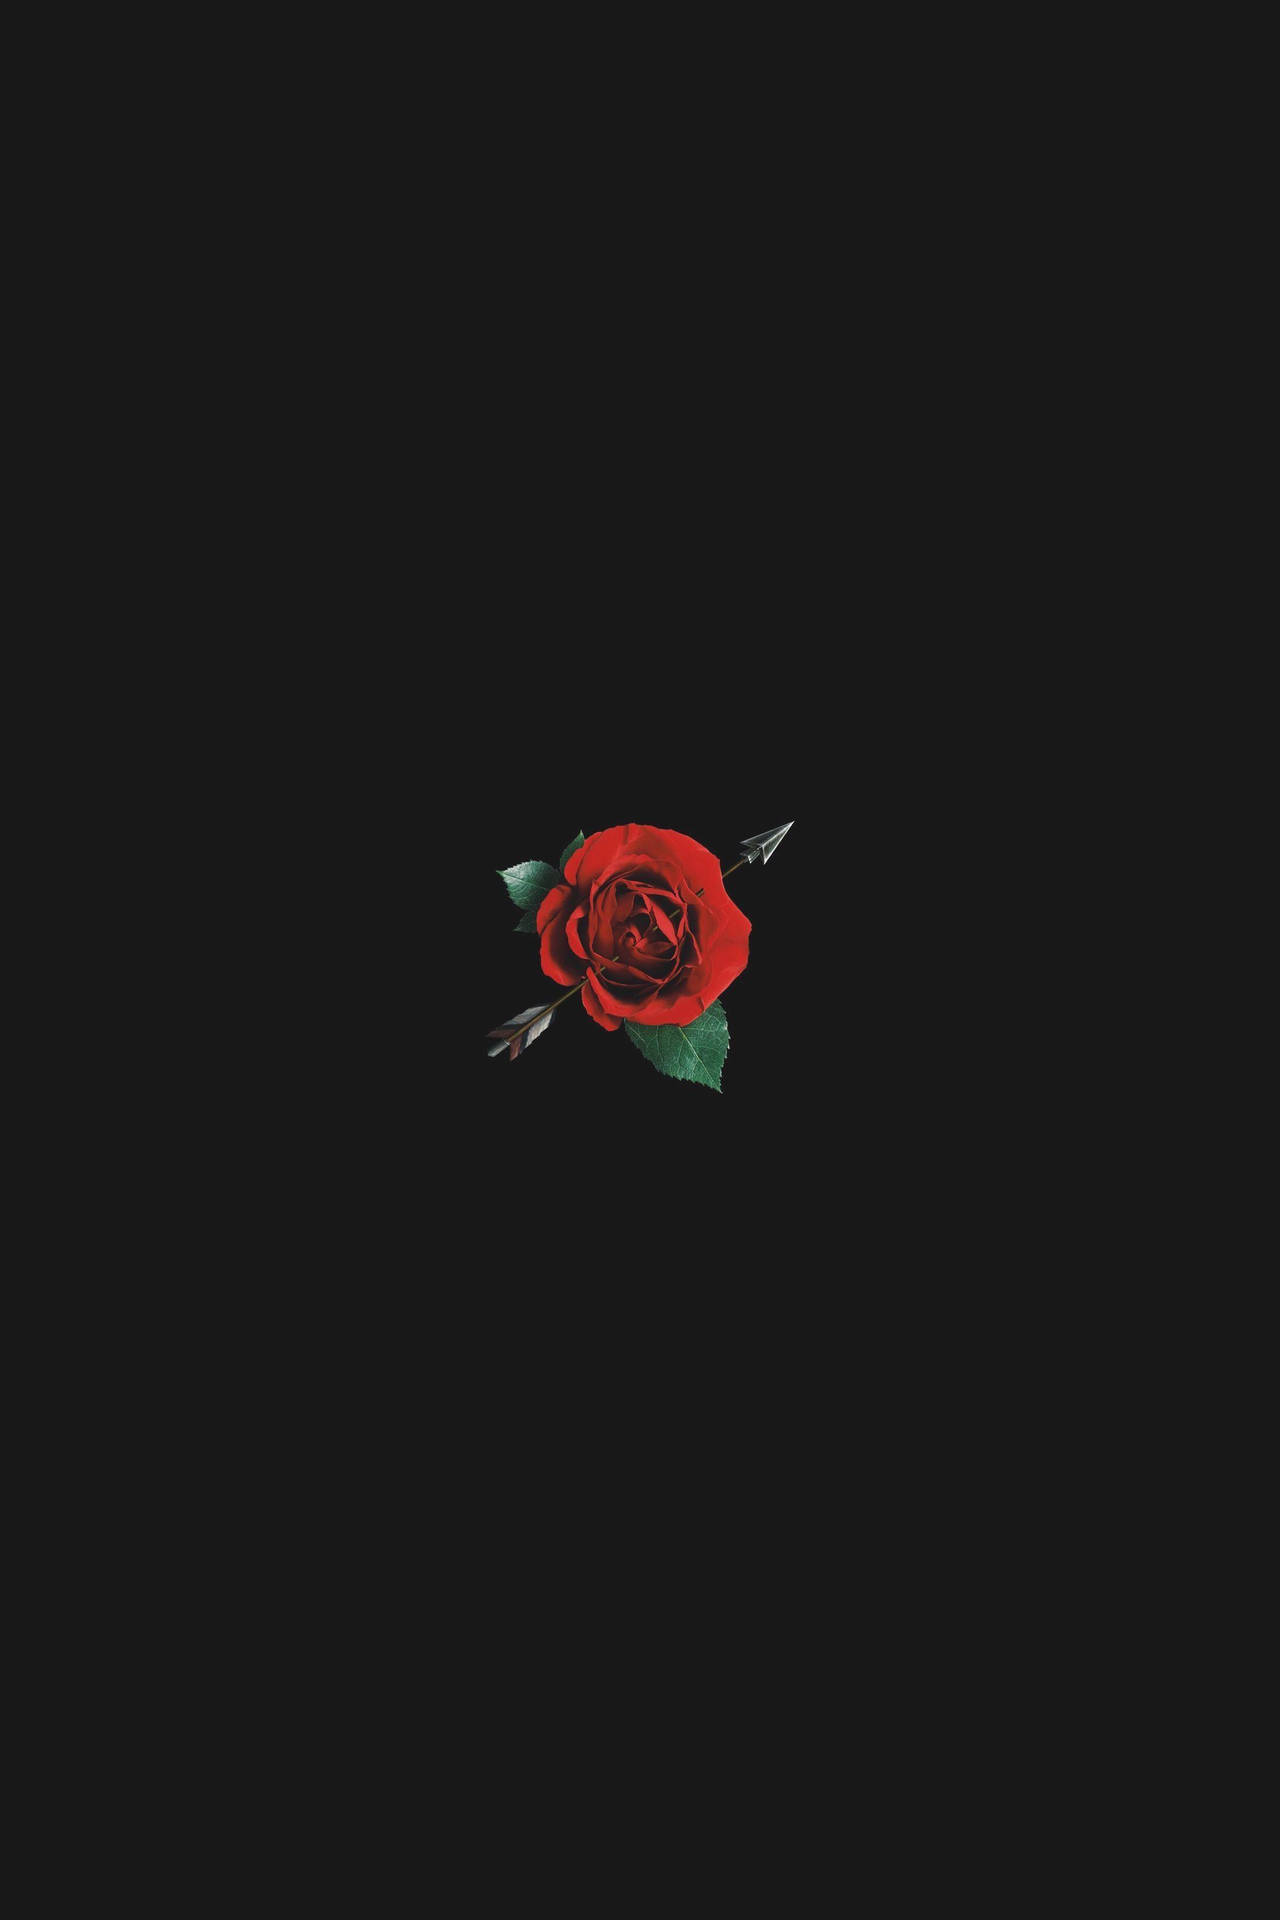 A Red Rose On A Black Background Wallpaper